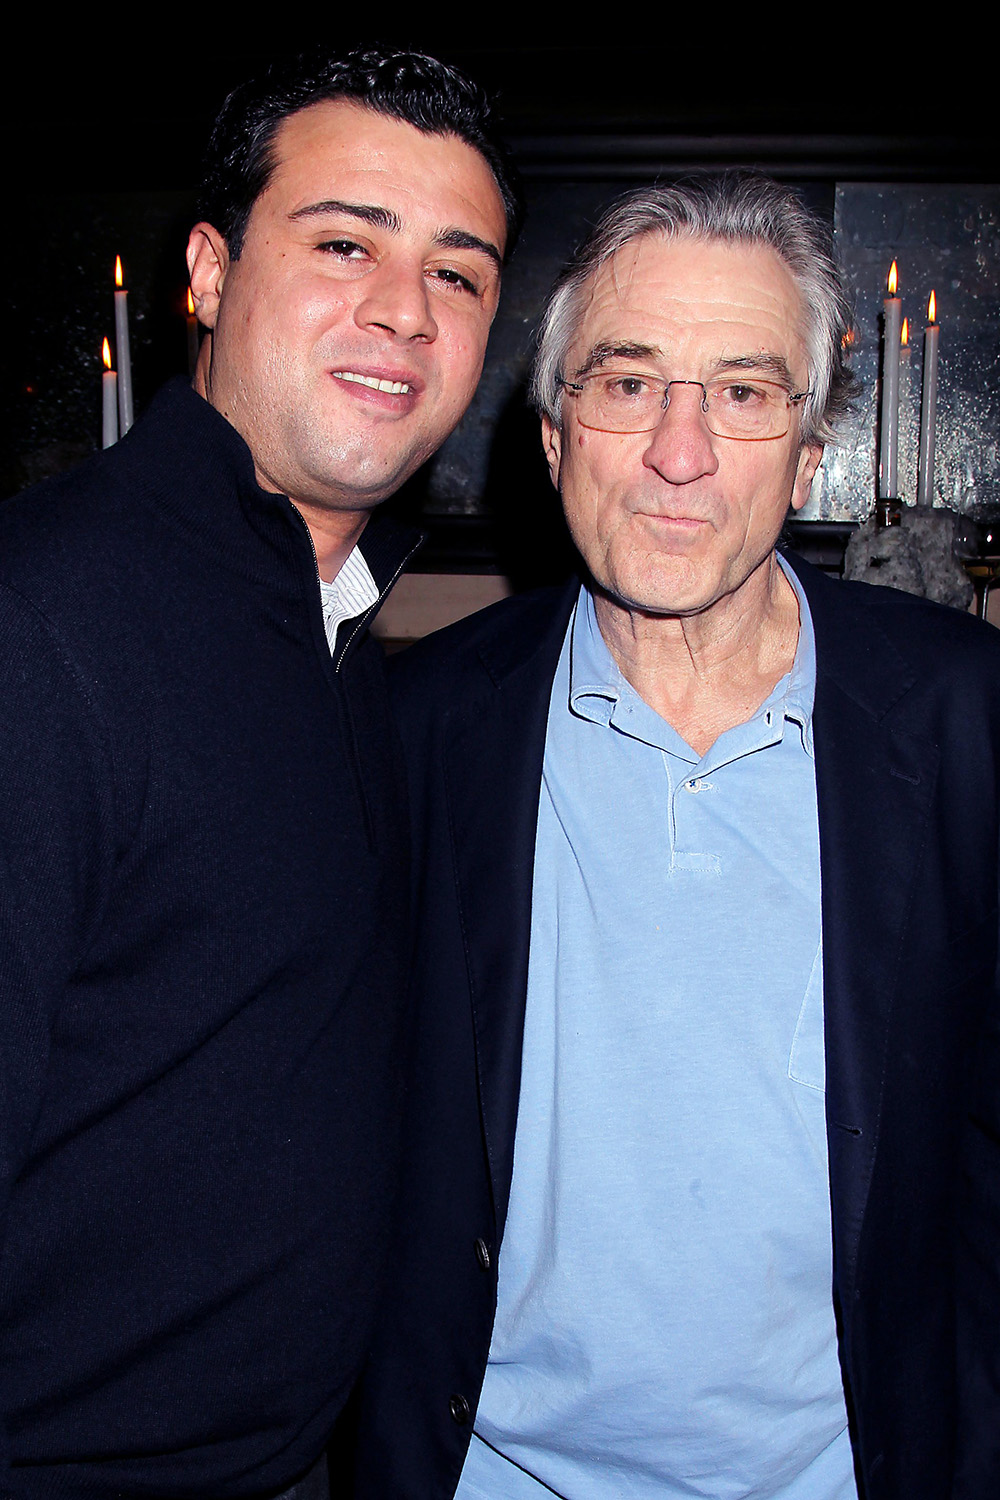 <p>Raphael De Niro smiles alongside his dad Robert De Niro at a New York event in January 2013. Raphael dabbled in acting when he was younger, but made the switch to real estate as he got older.</p>